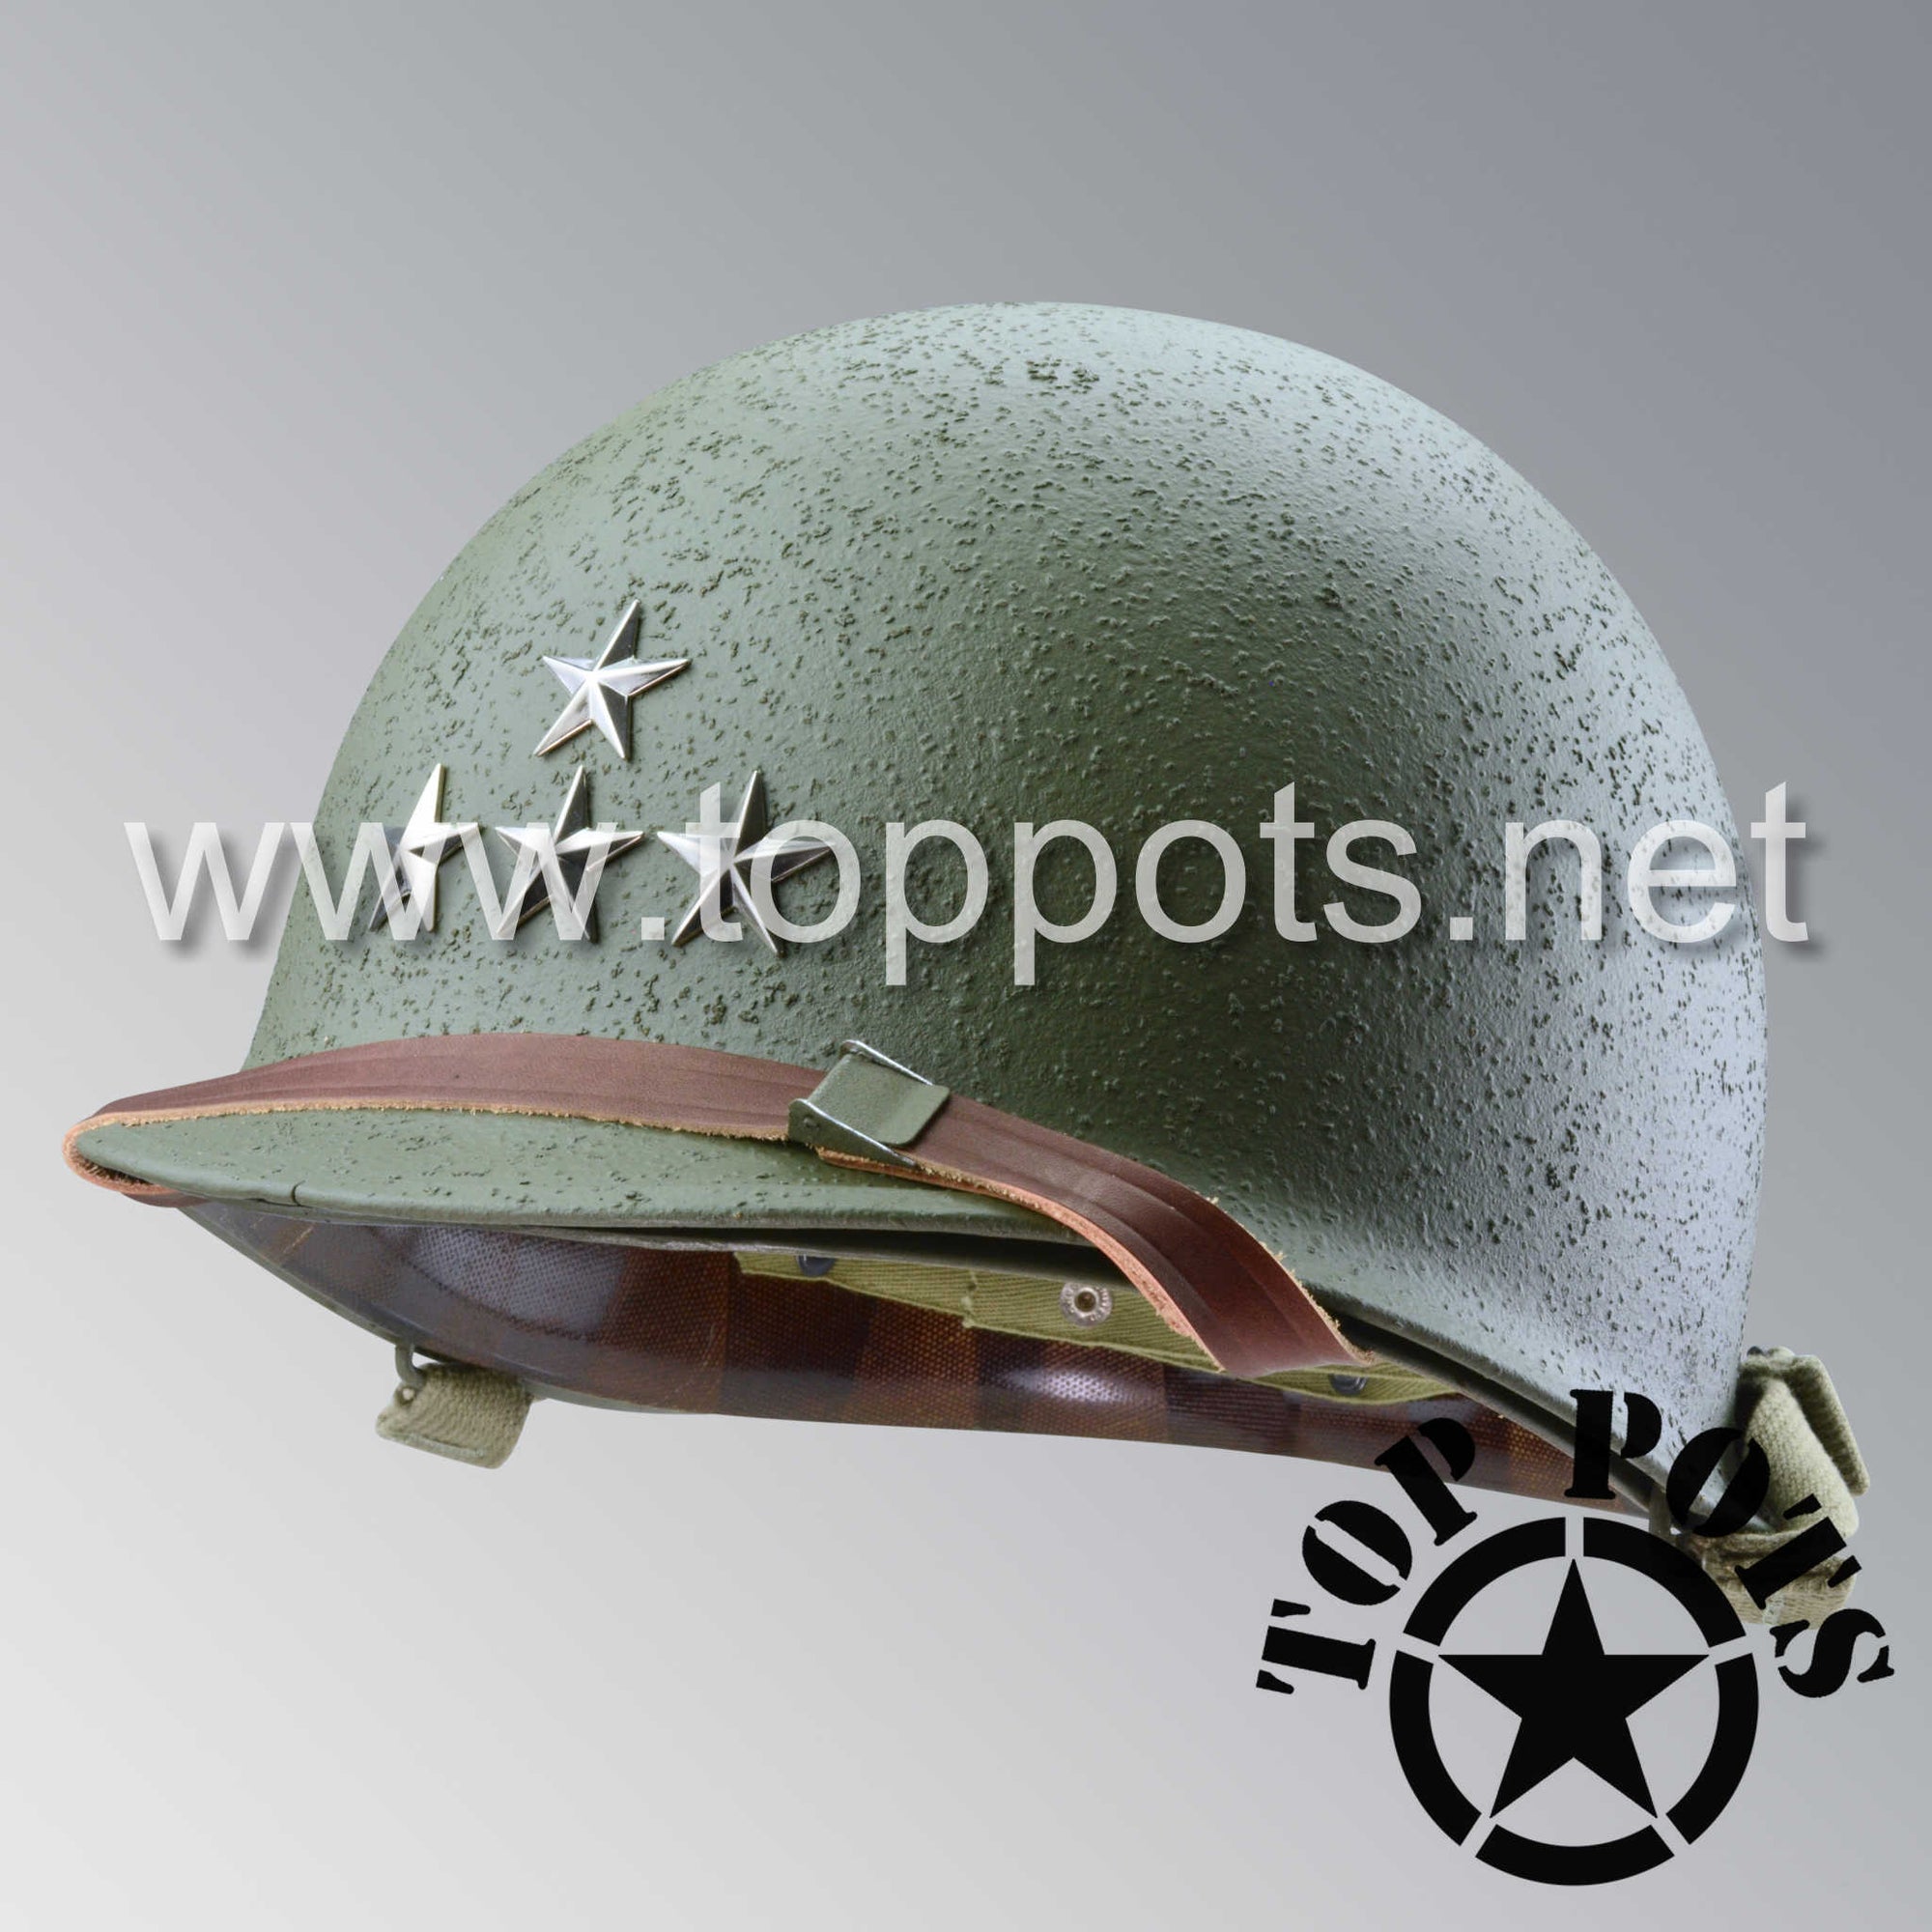 WWII US Army Restored Original M1 Infantry Helmet Swivel Bale Shell and Liner with 3rd Army General Patton Rank - George C Scott Patton Film